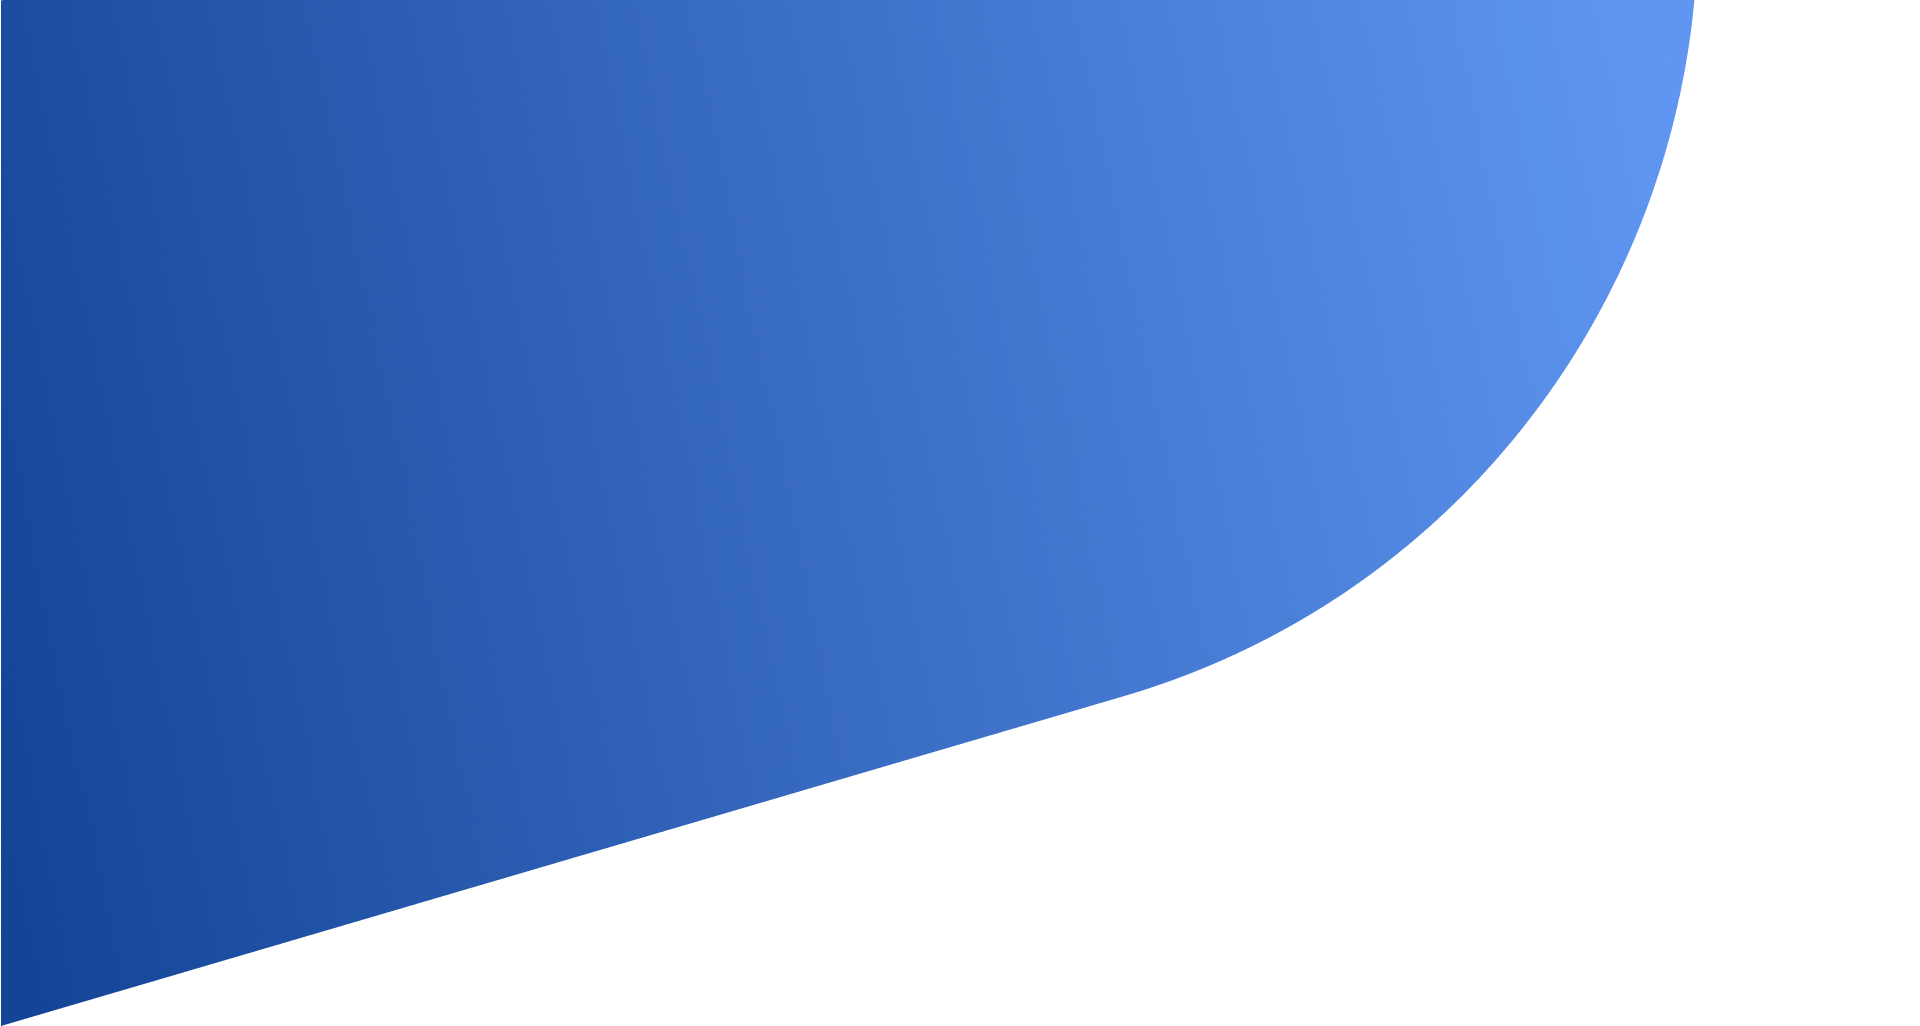 Background Blue Triangle Gradient